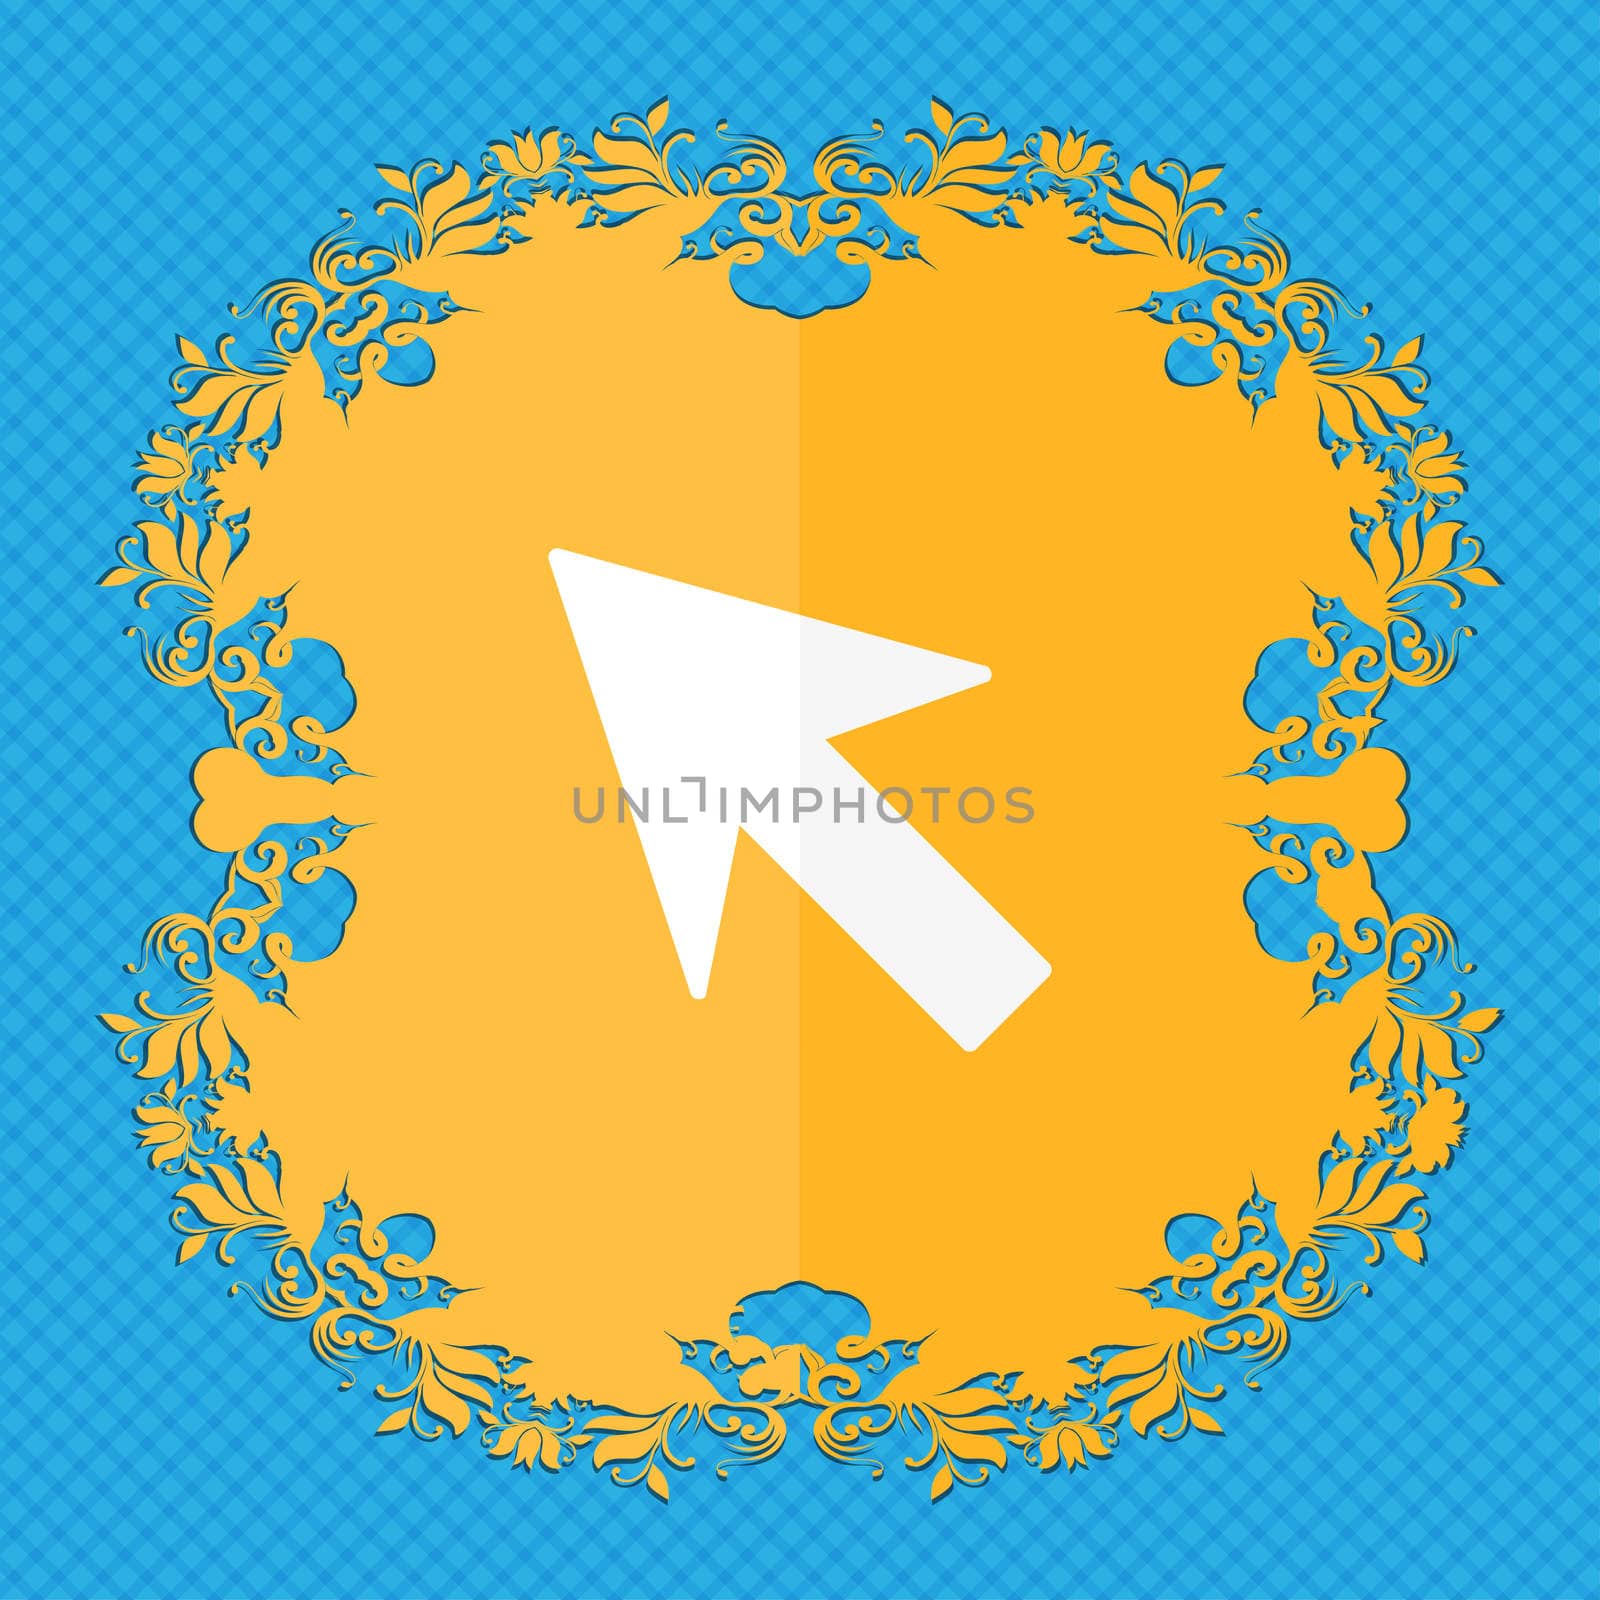 Cursor, arrow icon sign. Floral flat design on a blue abstract background with place for your text. illustration